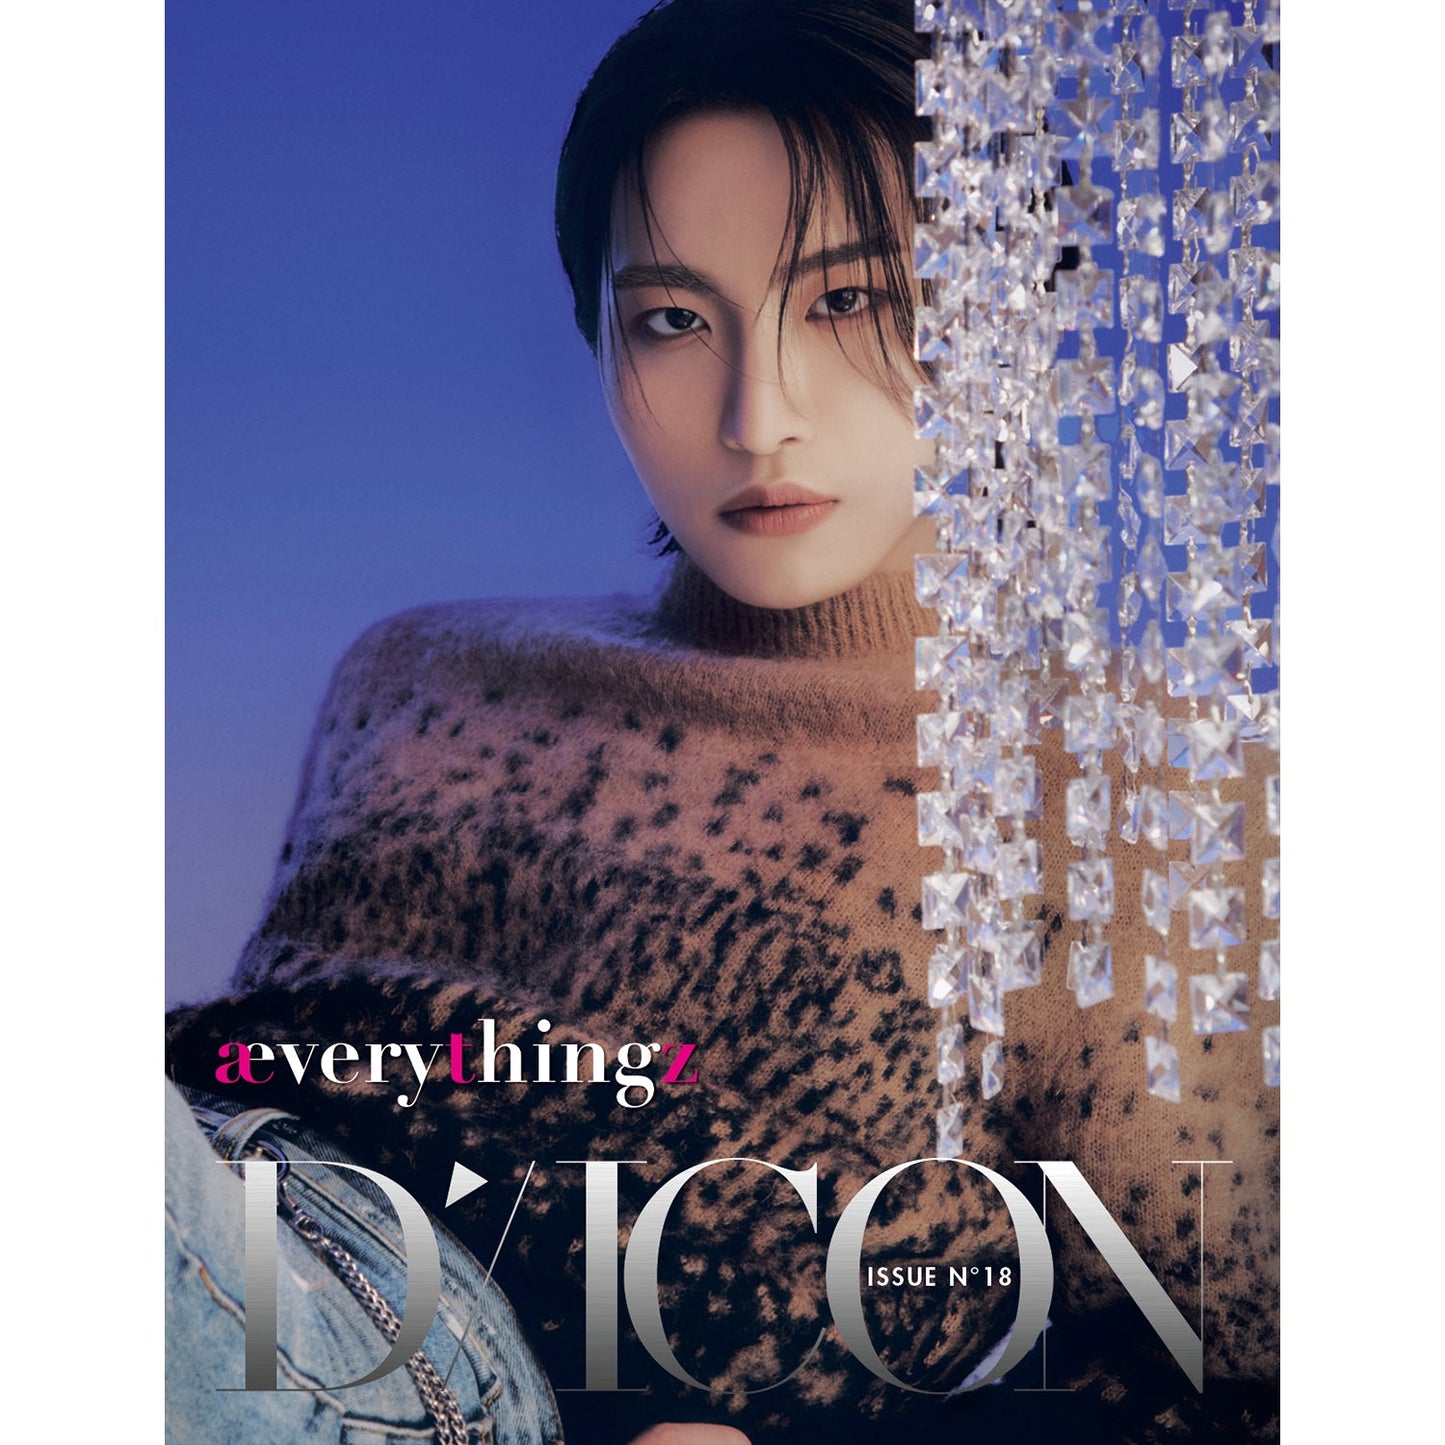 ATEEZ DICON 'ISSUE N°18 ATEEZ : ÆVERYTHINGZ' SEONGHWA VERSION COVER